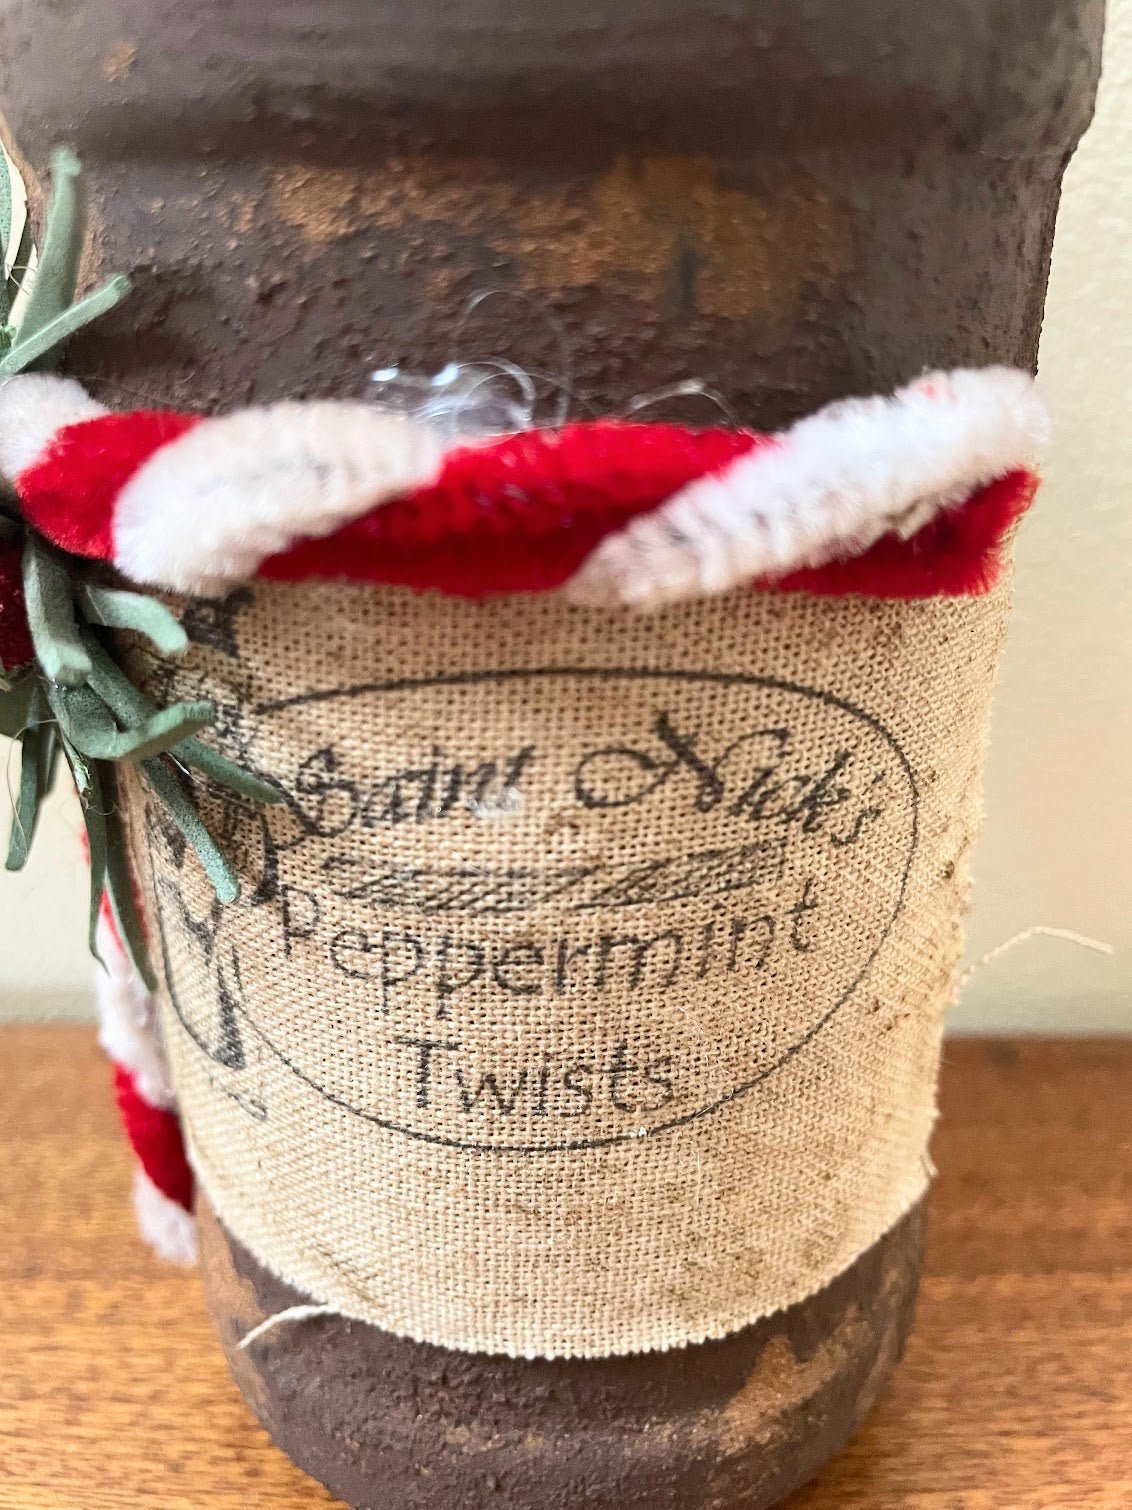 Primitive Colonial Handcrafted Peppermint Twist Christmas Jar 6&quot; - The Primitive Pineapple Collection